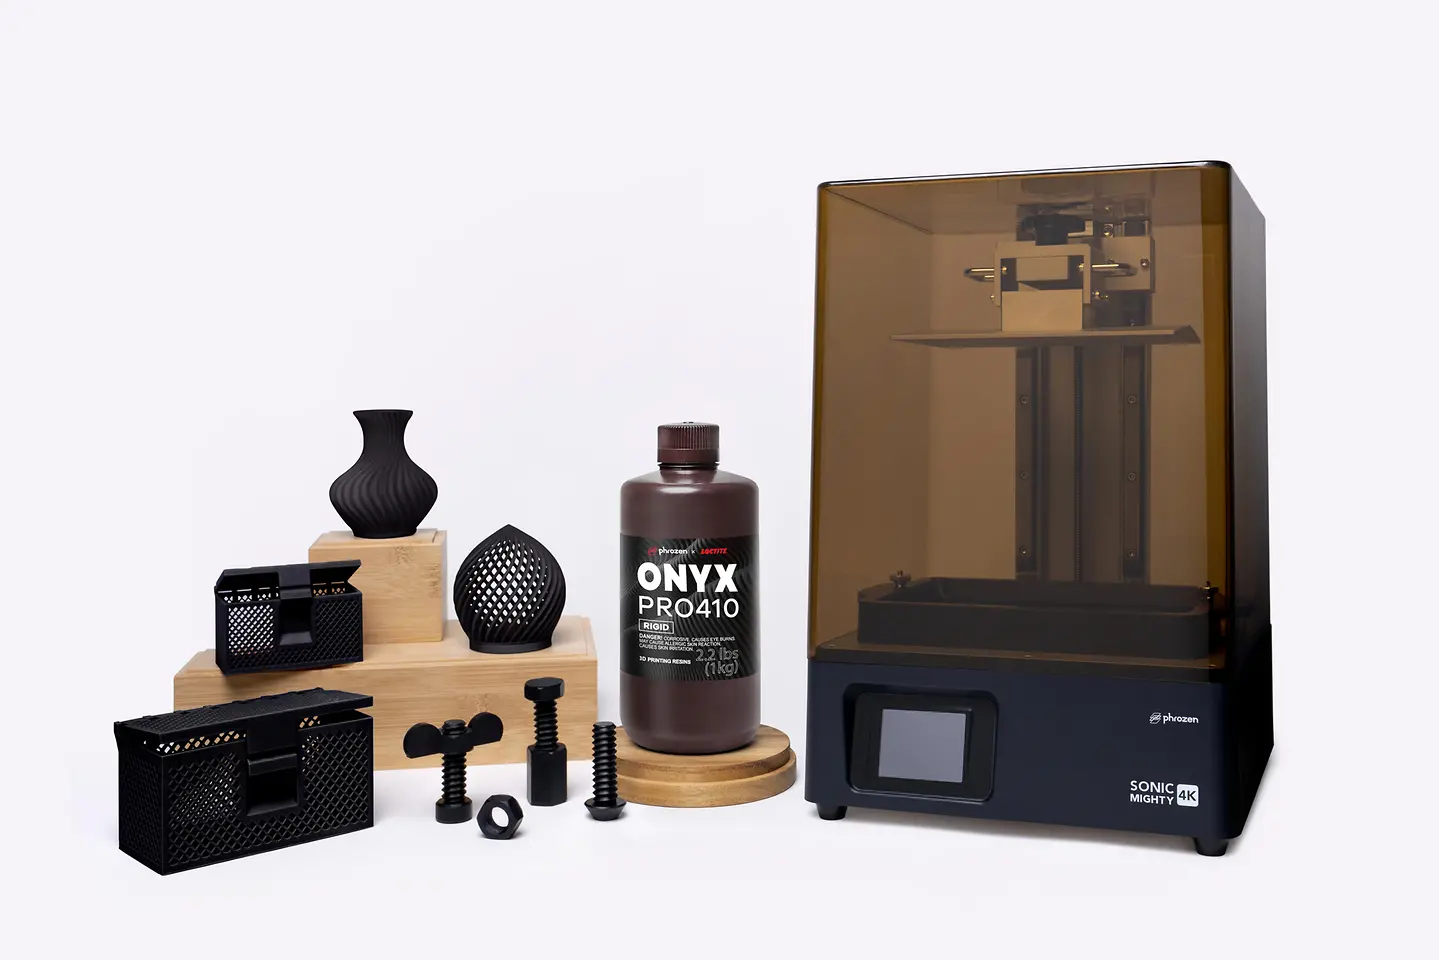 Phrozen and Henkel collaborate to drive the LCD 3D printing for professionals, hobbyists and enthusiasts across markets.